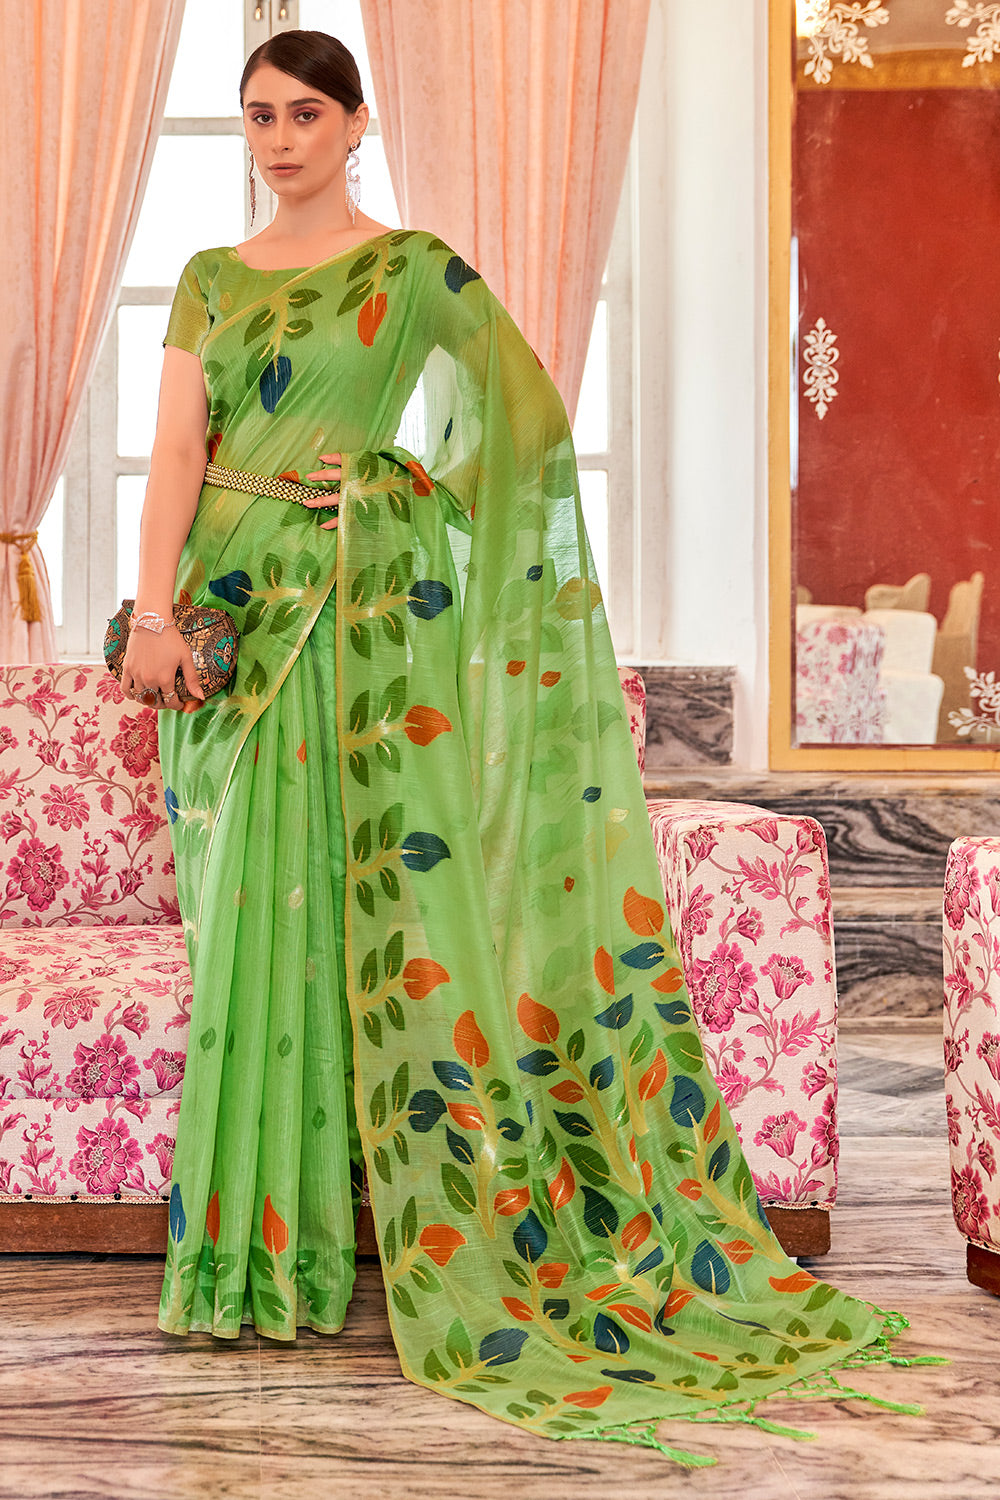 Green Linen Saree With Printed Work